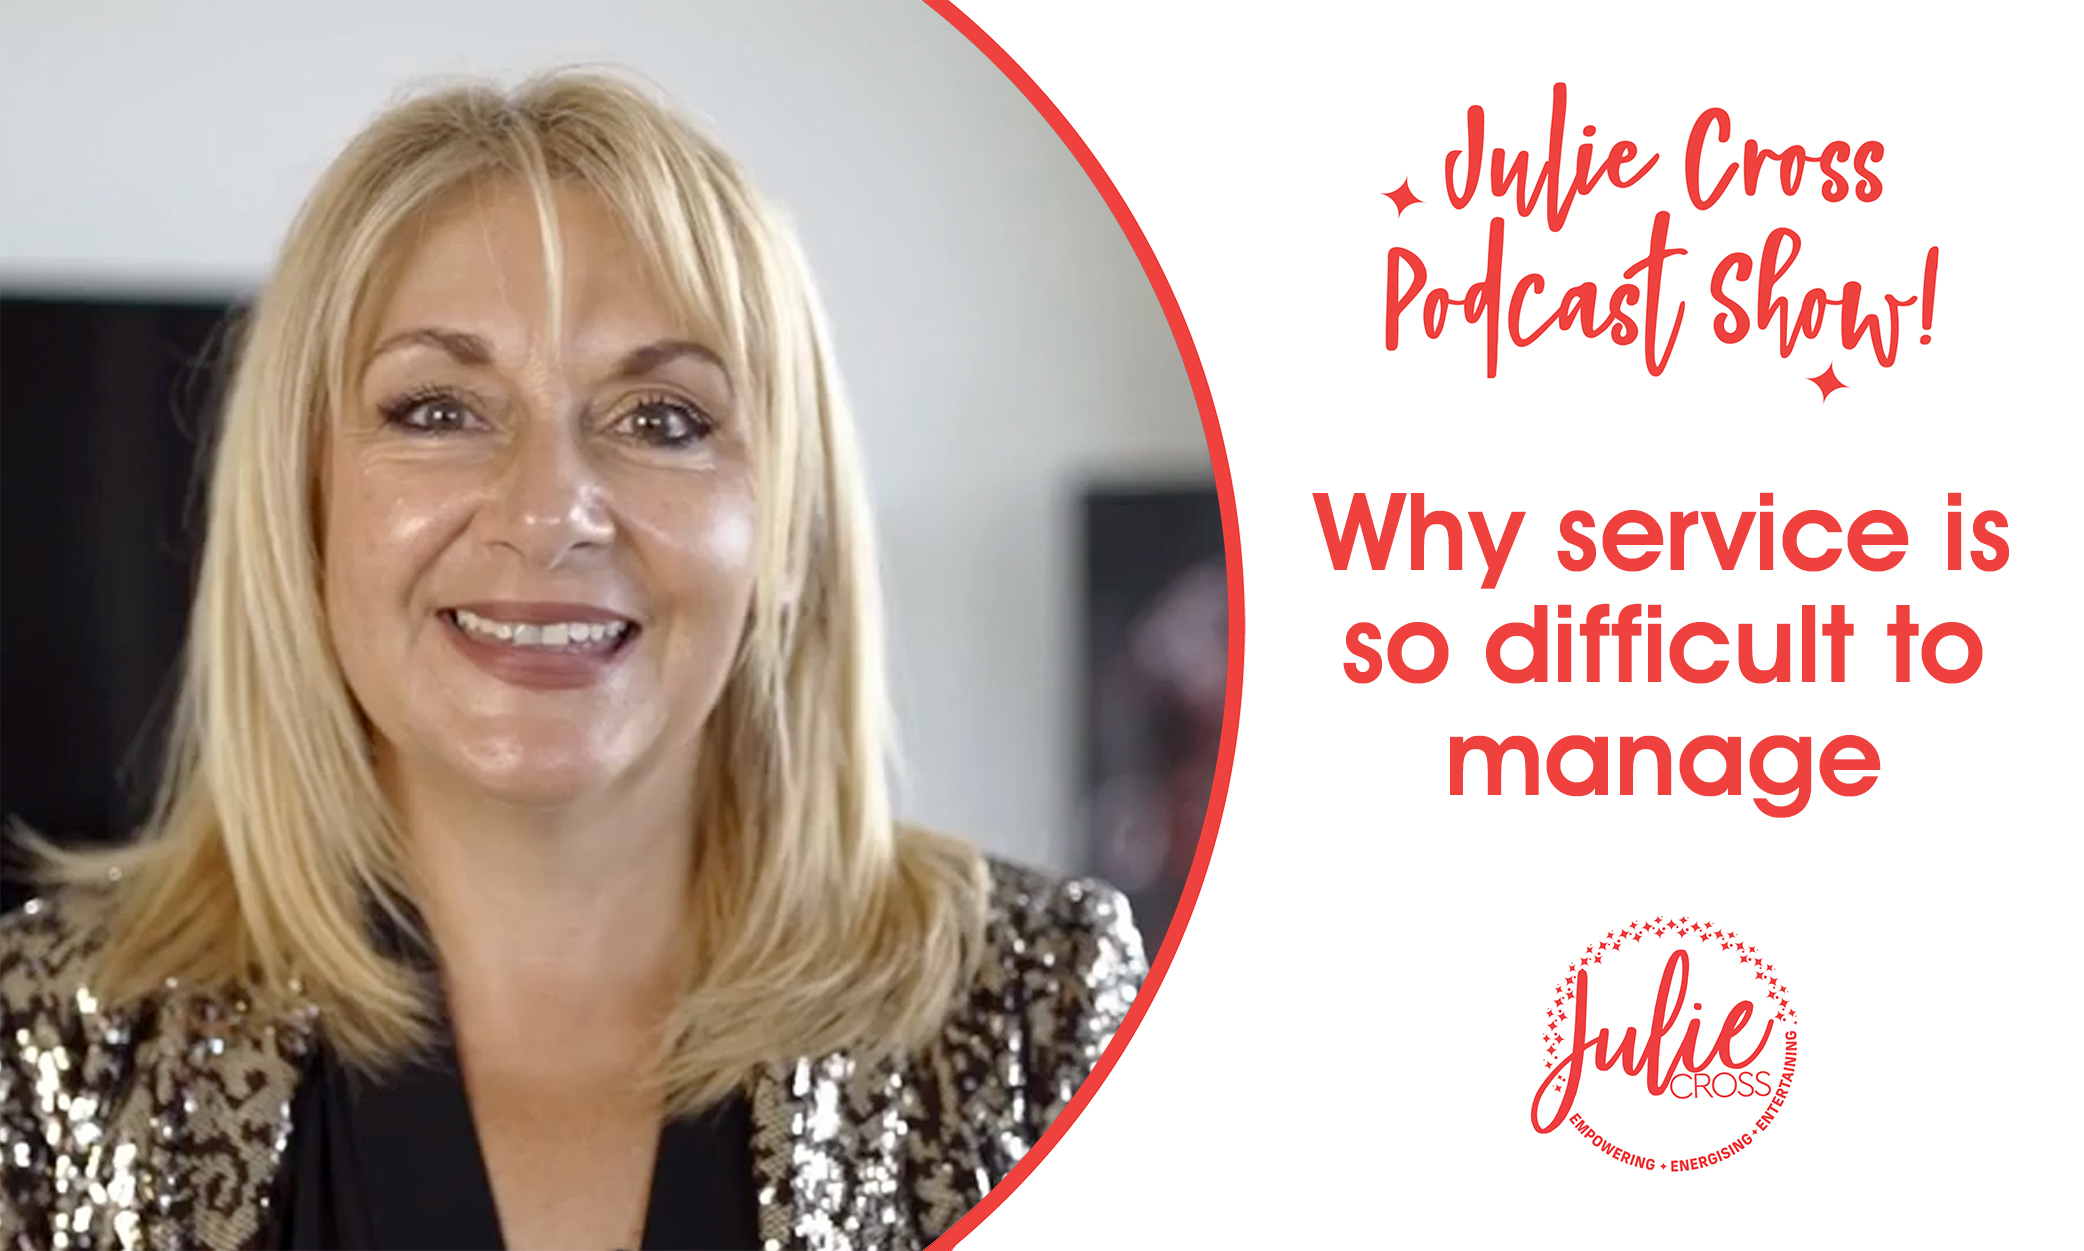 Juile Cross Podcast what is service difficult to manage